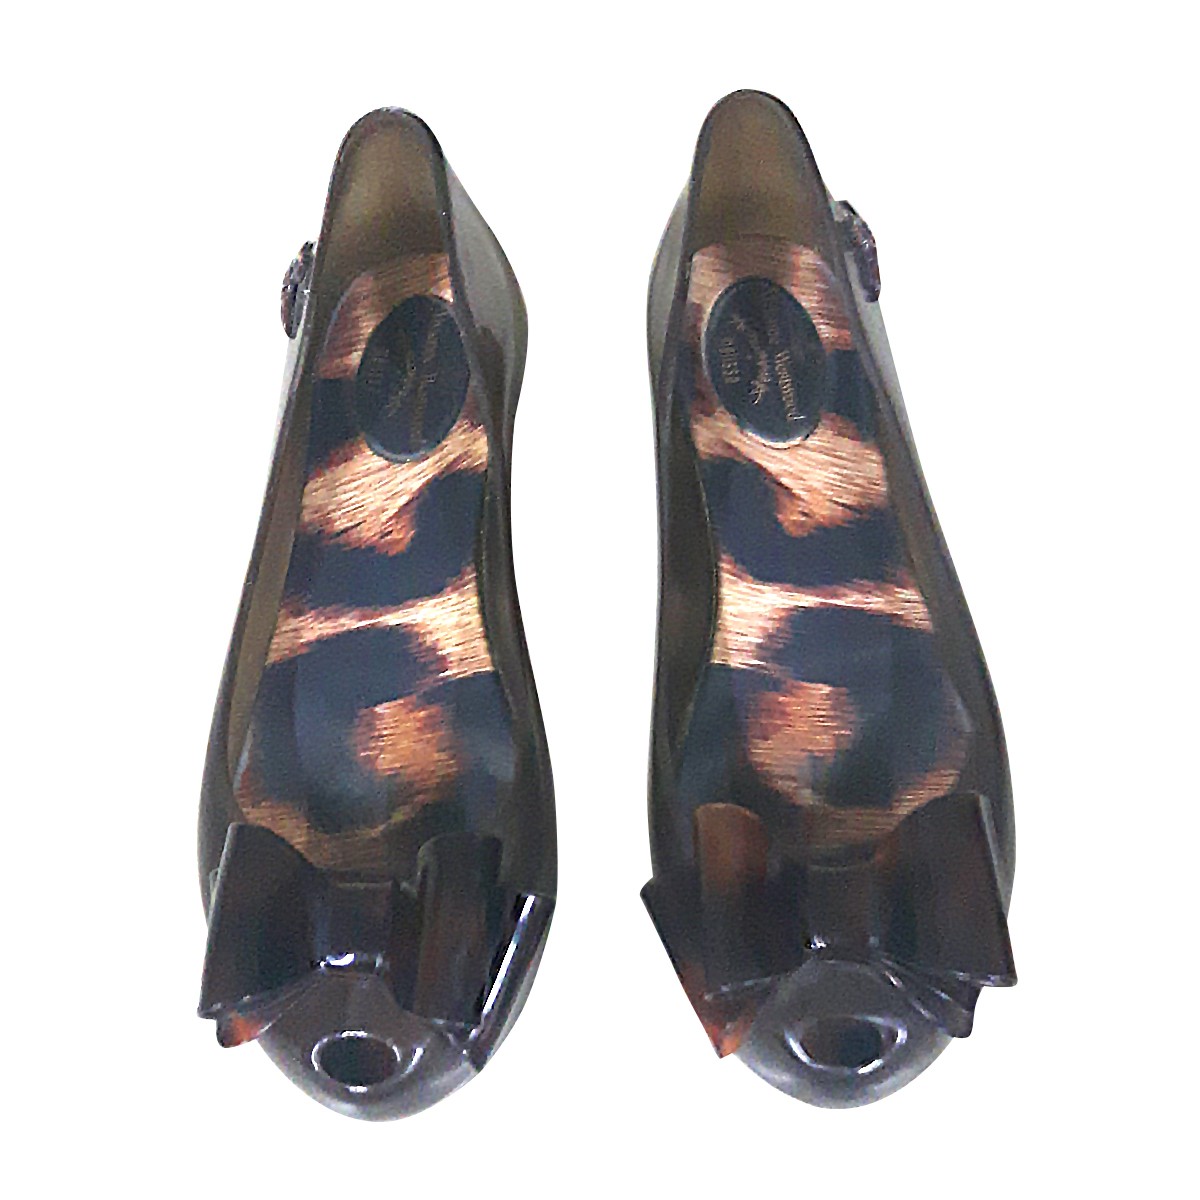 vivienne westwood jelly shoes